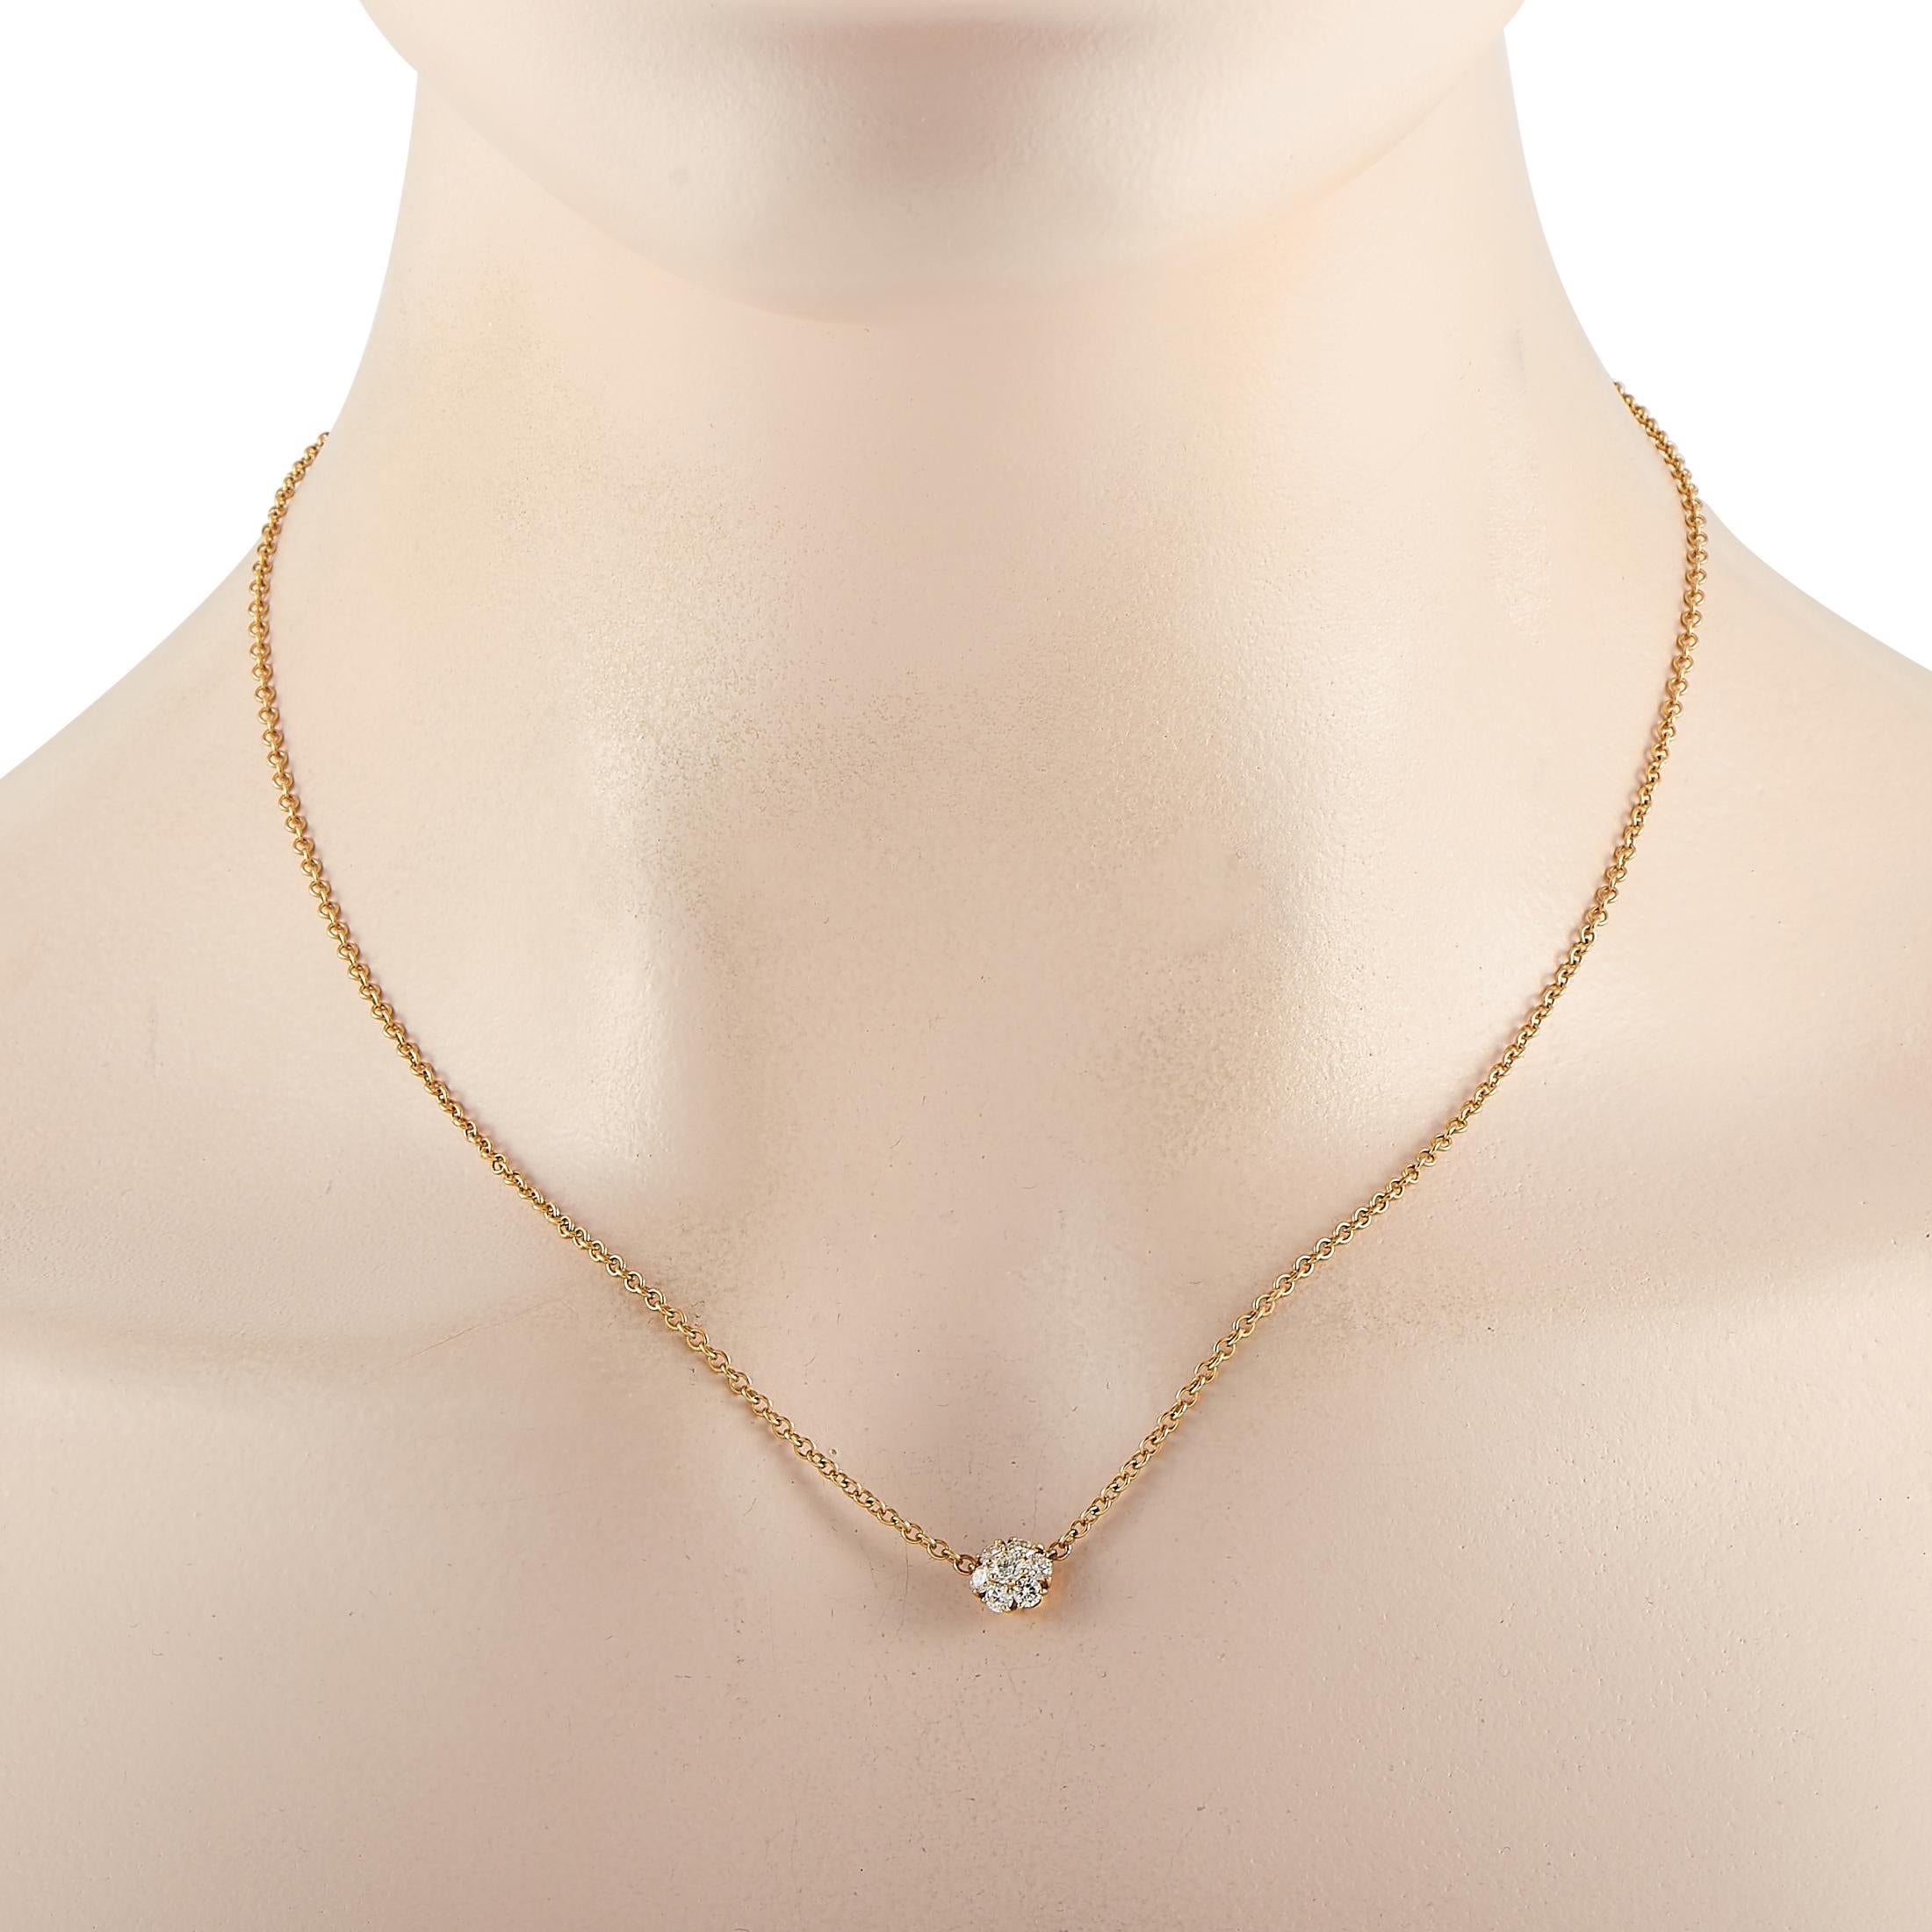 This Van Cleef & Arpels necklace is made of 18K yellow gold and embellished with diamonds that amount to 0.50 carats. The diamonds feature E color and VVS clarity. The necklace weighs 4.7 grams and boasts an 18” chain and a pendant that measures